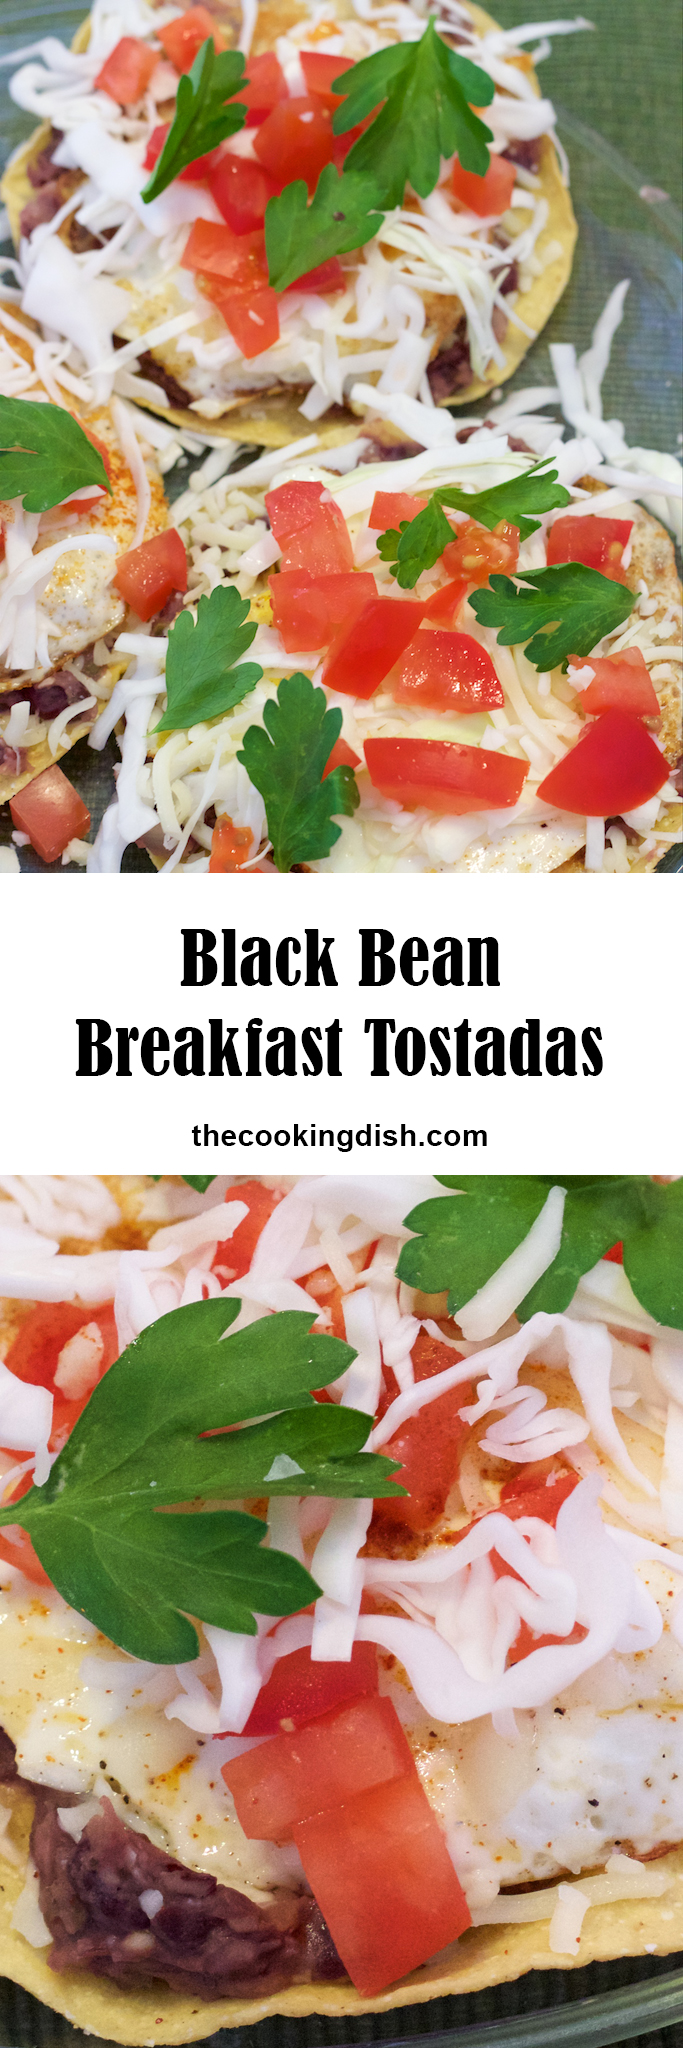 Black Bean Breakfast Tostadas are super fast and easy! And they're delicious!